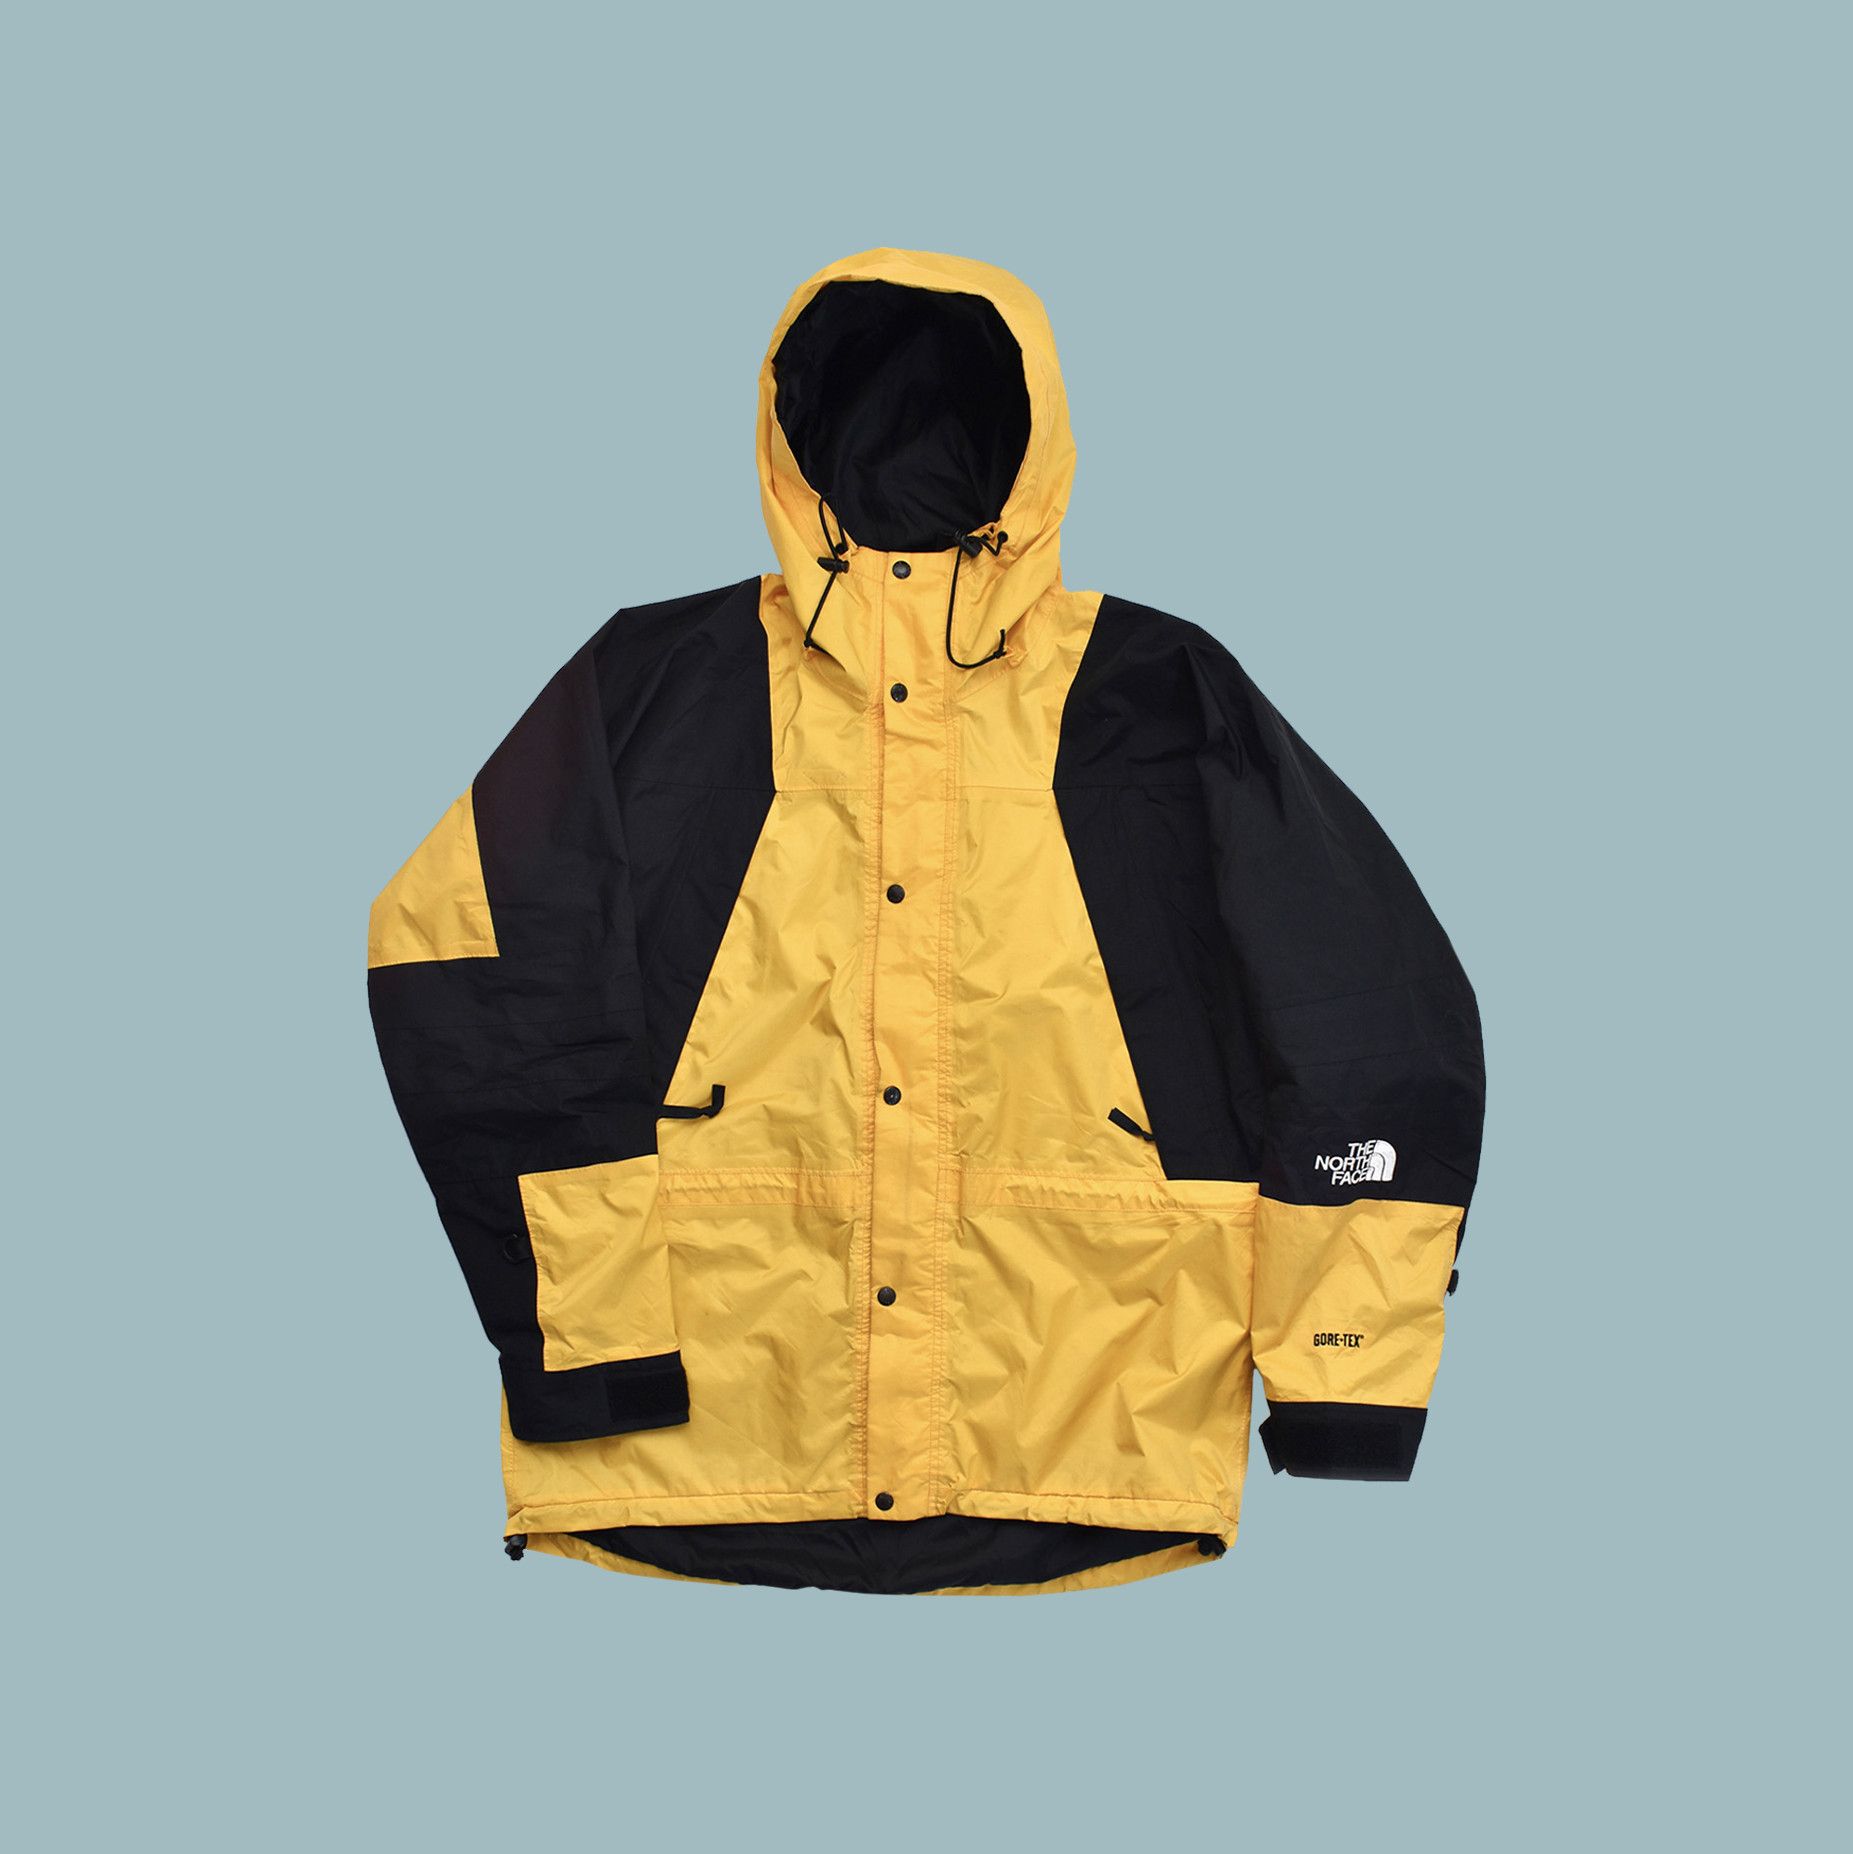 The North Face *MINT* *RARE* Vintage Yellow North Face Gore-Tex Jacket 90s Size US L / EU 52-54 / 3 - 1 Preview